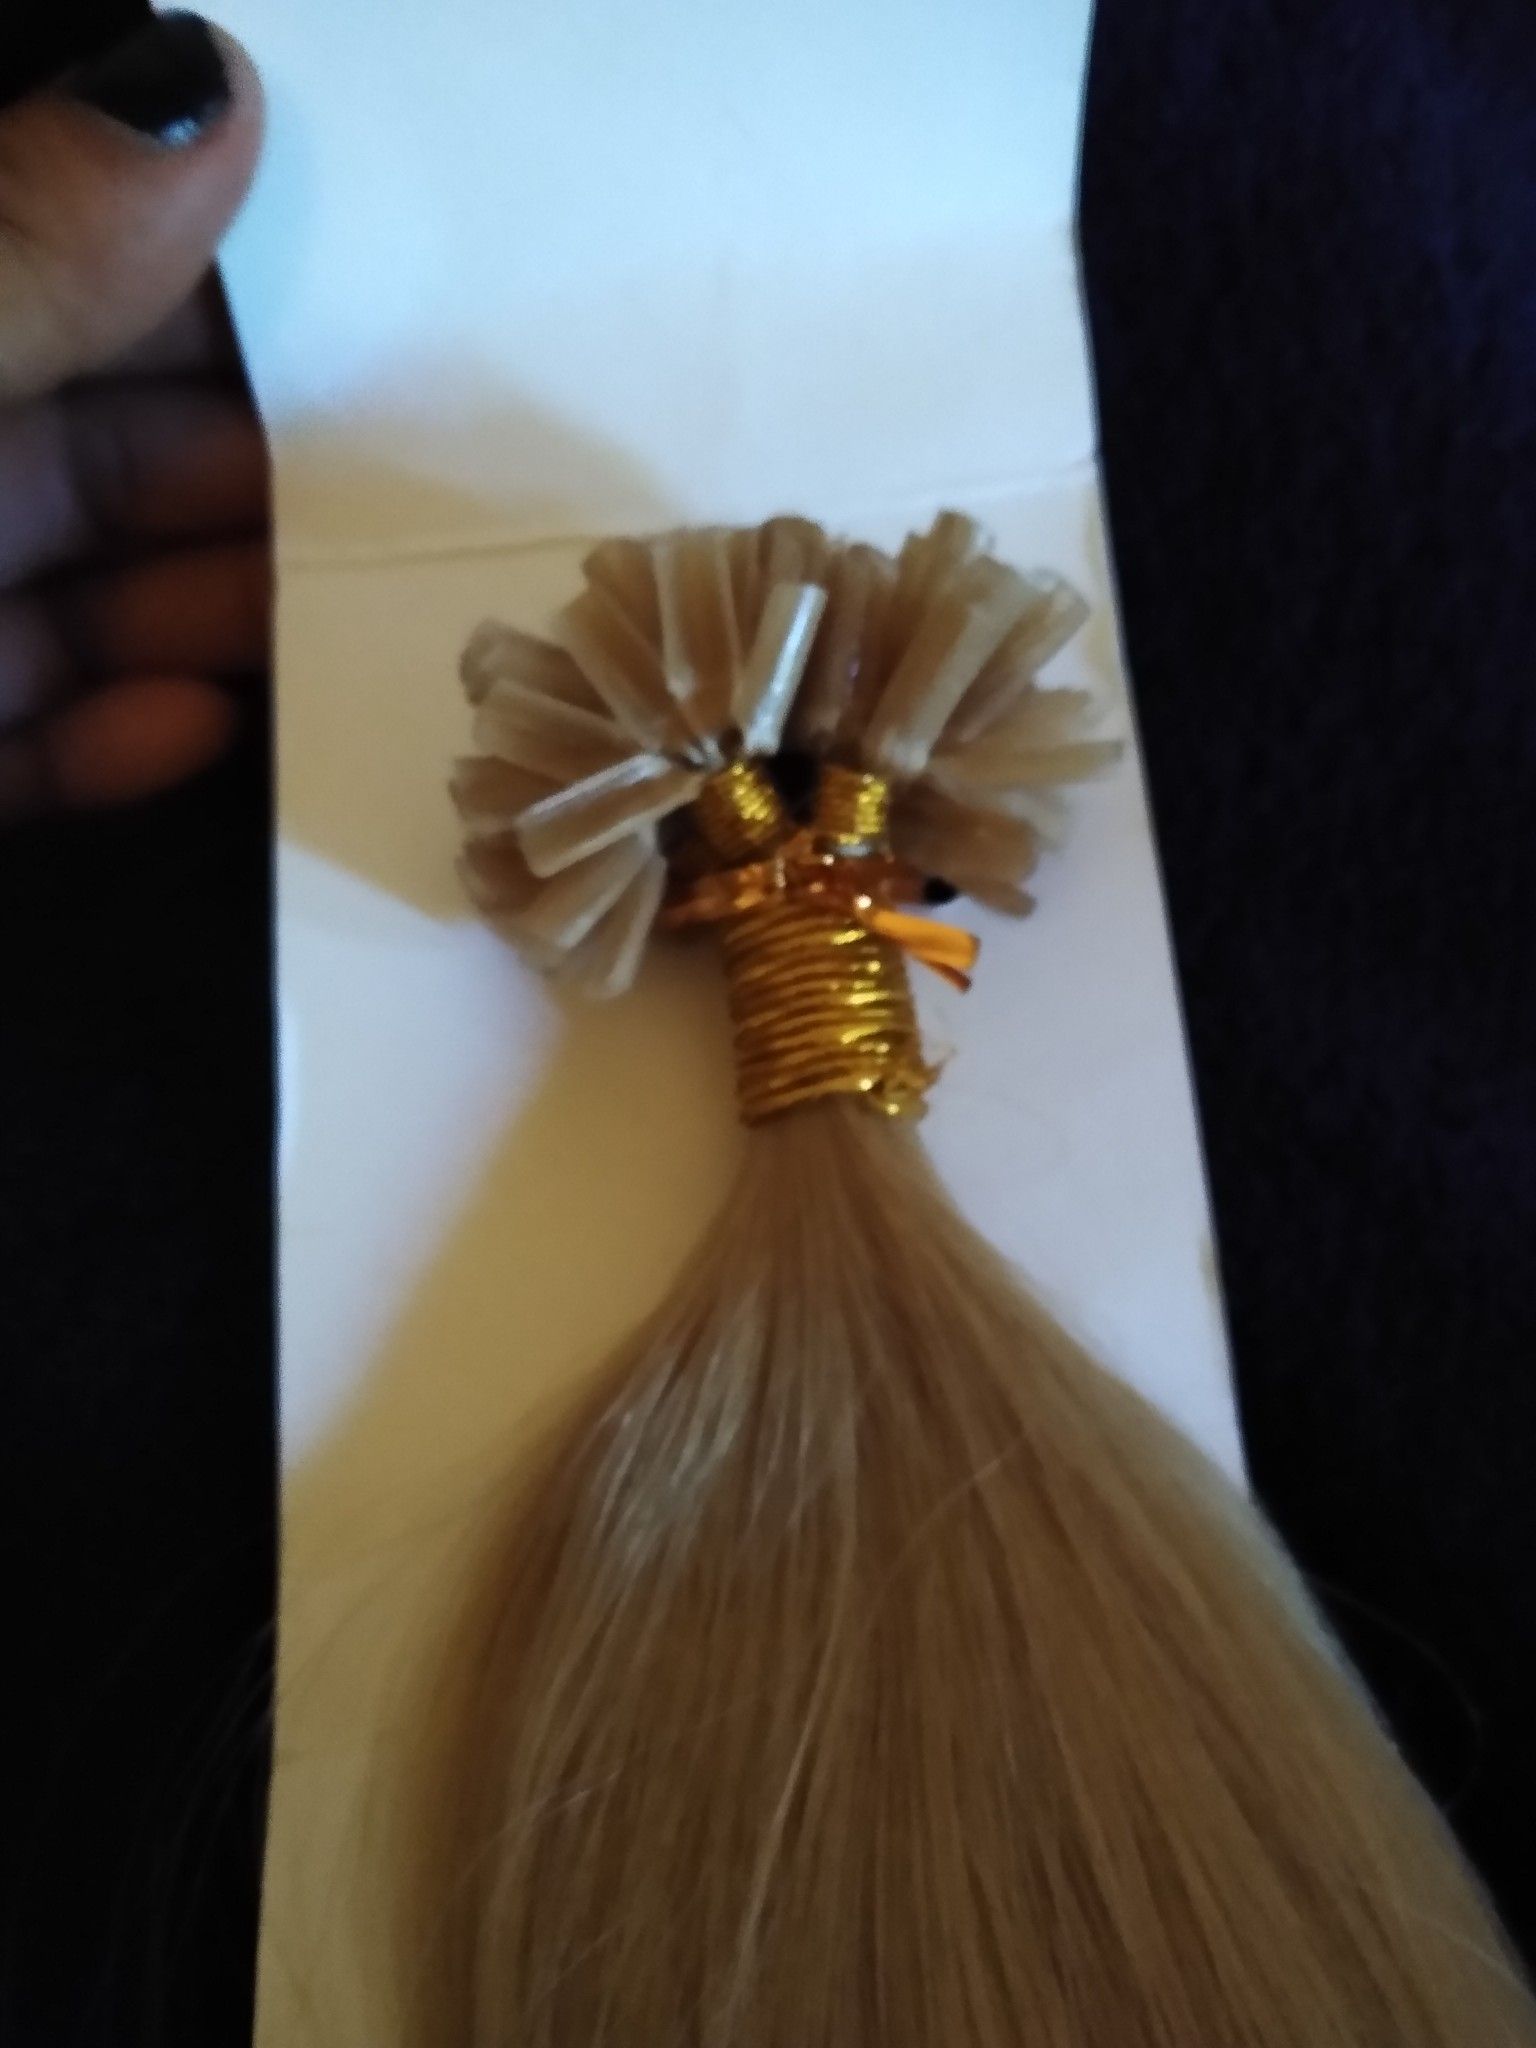 70 grams of 22 inches blonde human hair micro link HAIR extenciones new for $40 I'm city of bell ca